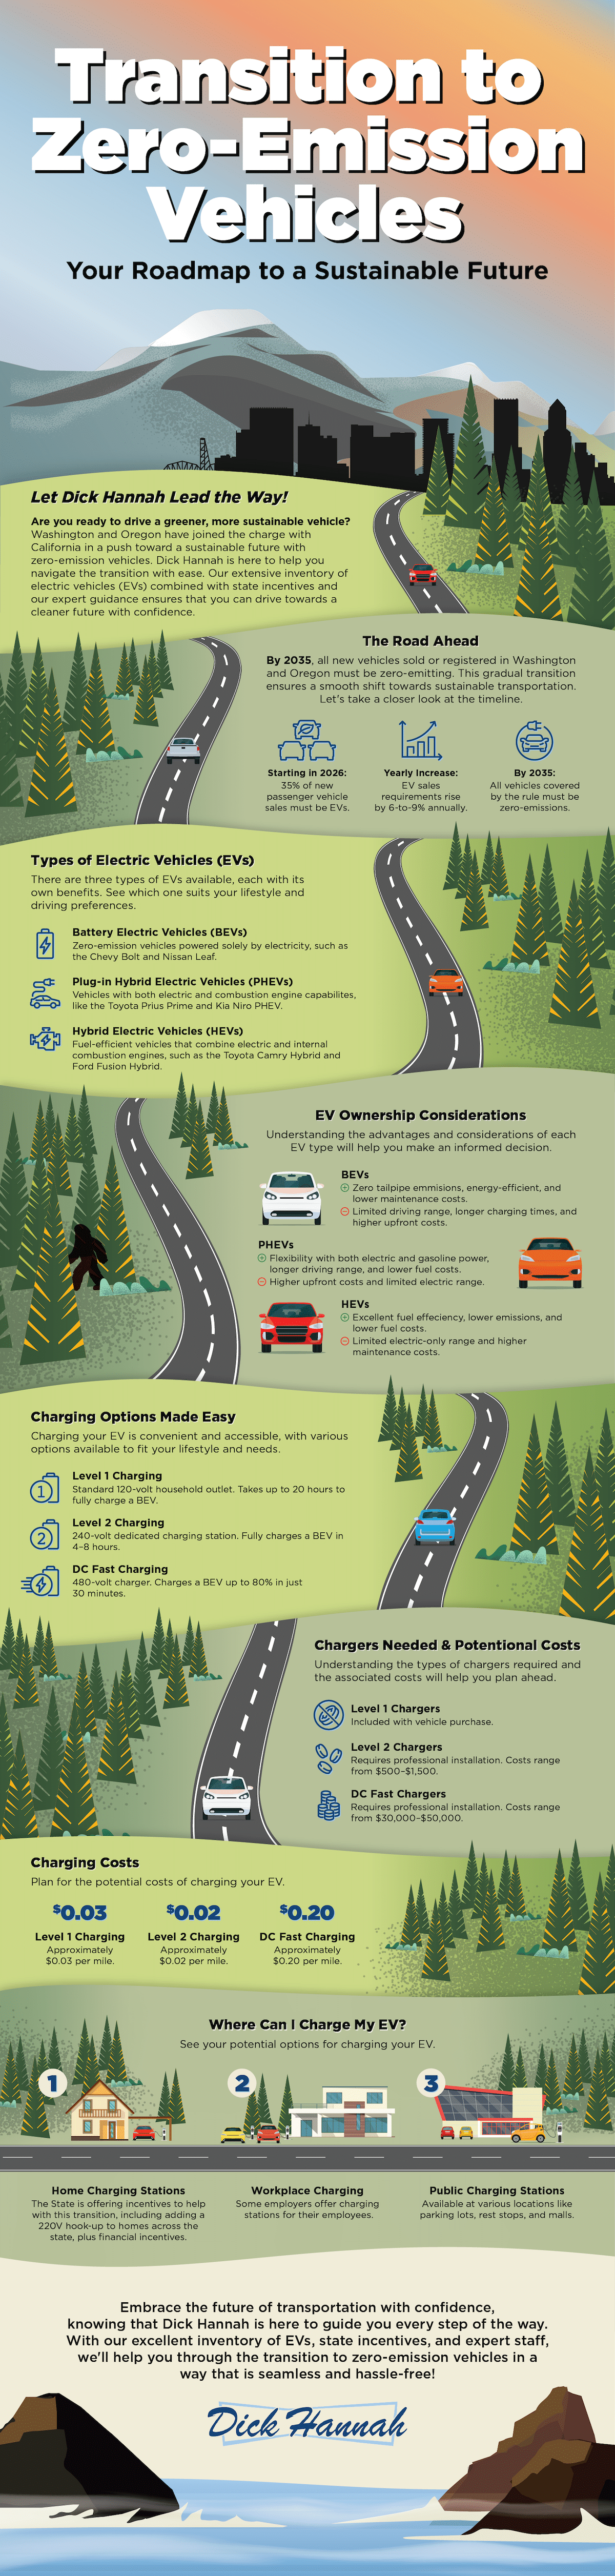 Infographic summarizing the transition to zero-emission vehicles, including the roadmap to a sustainable future, types of electric vehicles, ownership considerations, charging options and costs, and locations for charging EVs.